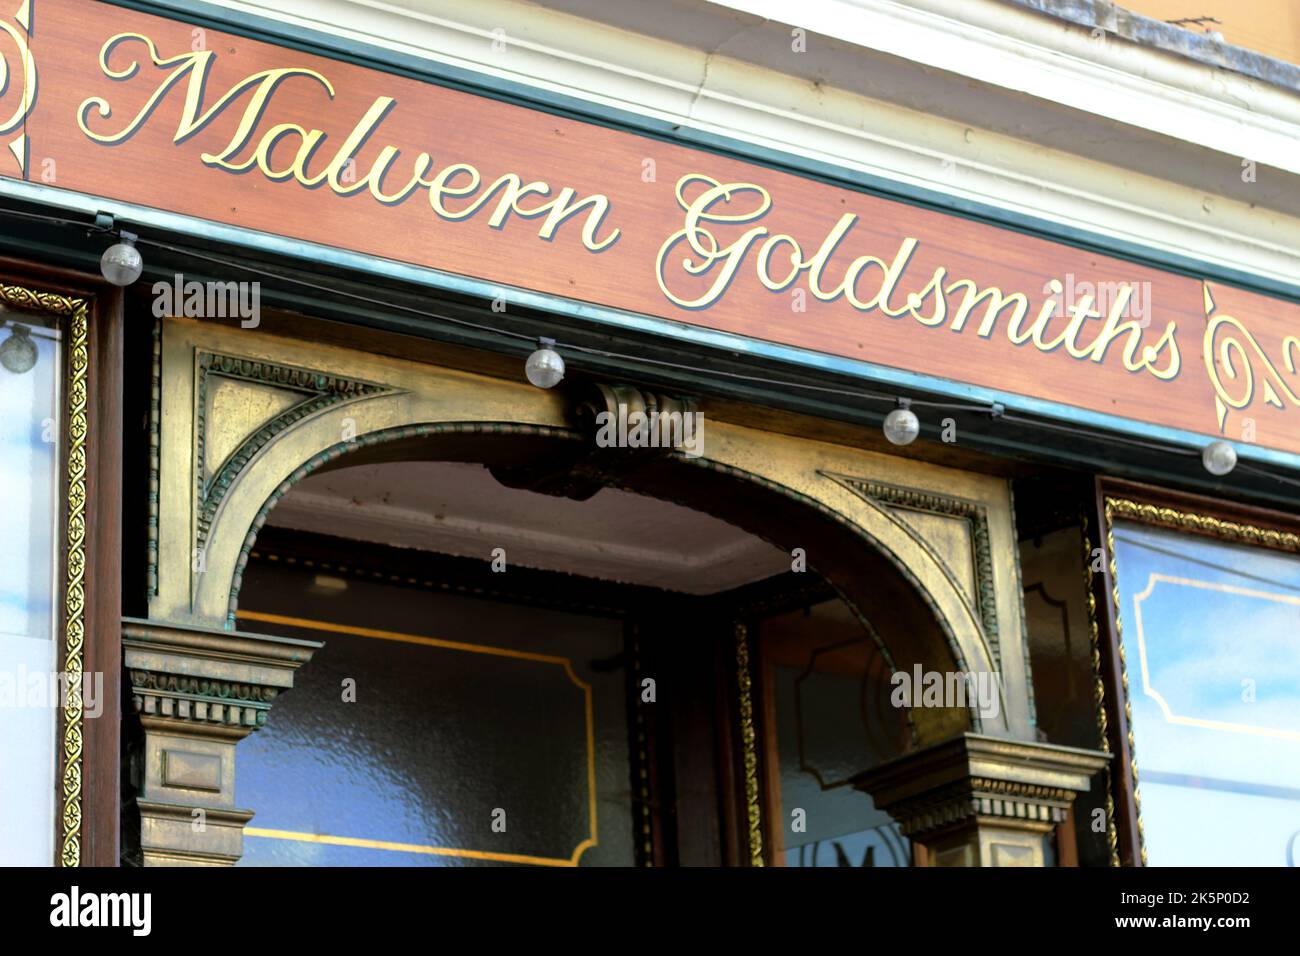 Malvern Goldsmiths grand entrance in Great Malvern, Worcestershire - formerly the chemist run by Lea and Perrins of Worcestershire Sauce fame Stock Photo